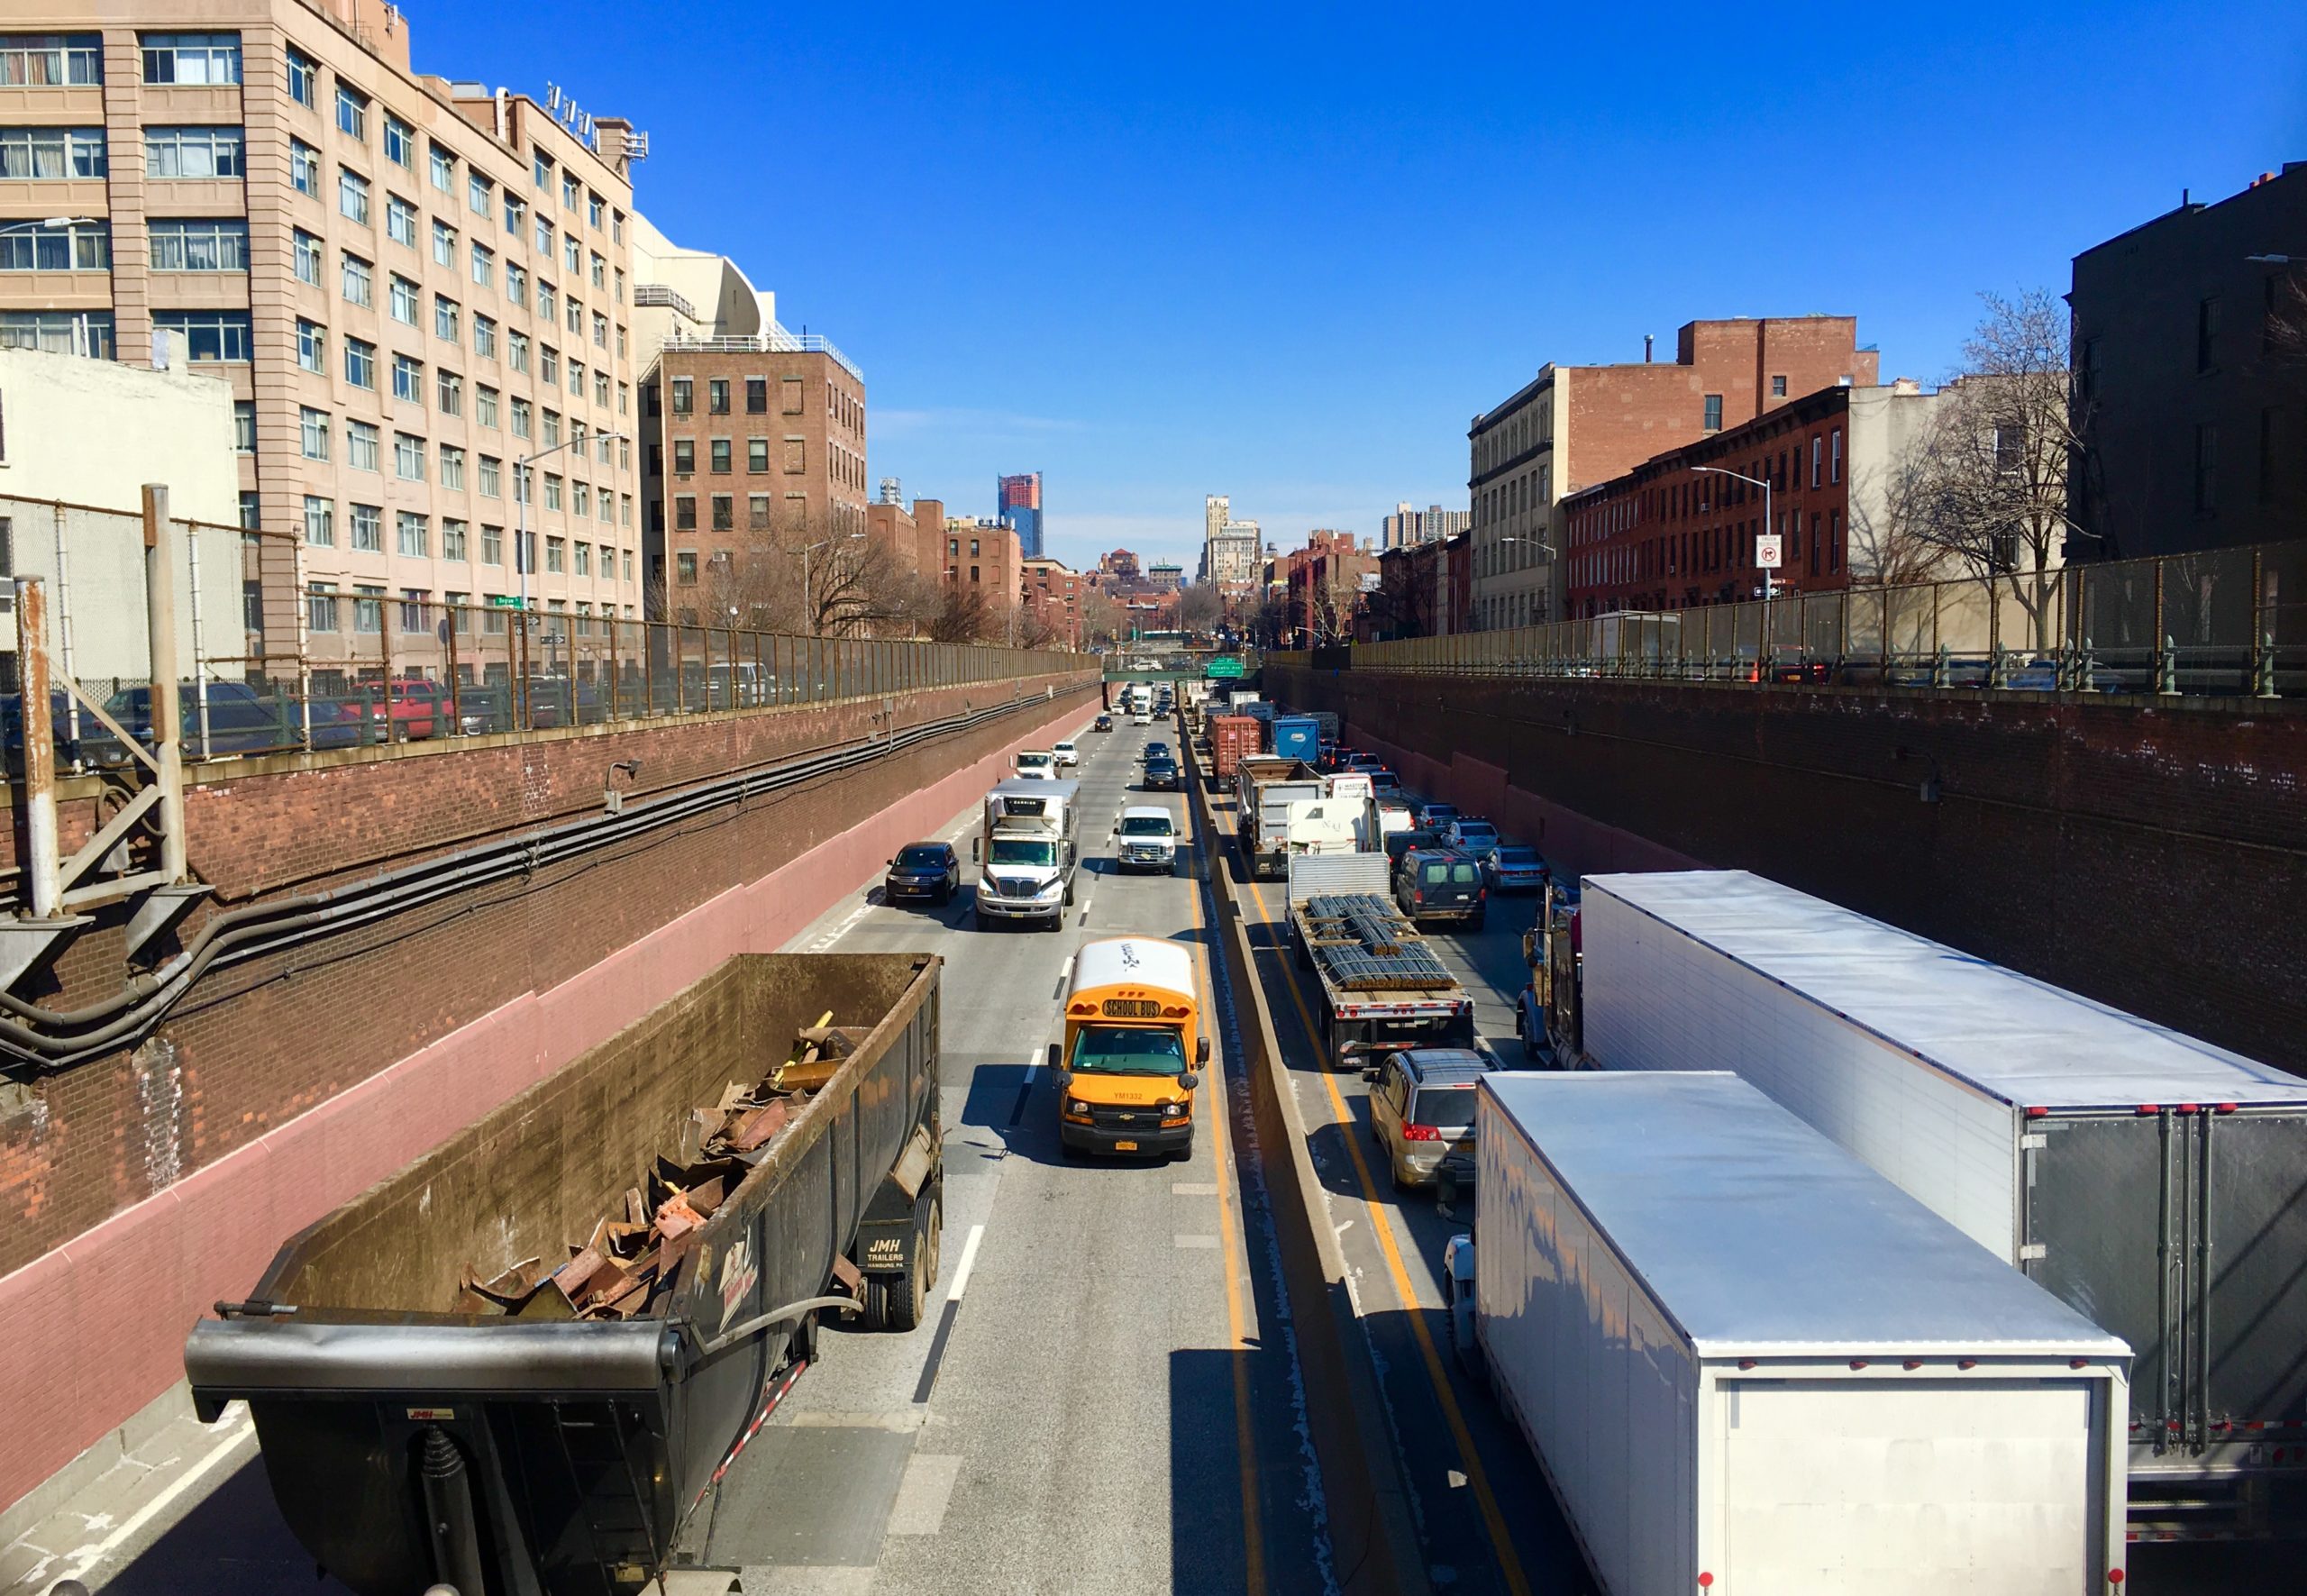 The BQE trench has divided neighborhoods for more than 60 years, and Cobble Hill residents hope to cap it over as part of a multi-billion dollar BQE rehabilitation plan. Photo: Lore Croghan/Brooklyn Eagle